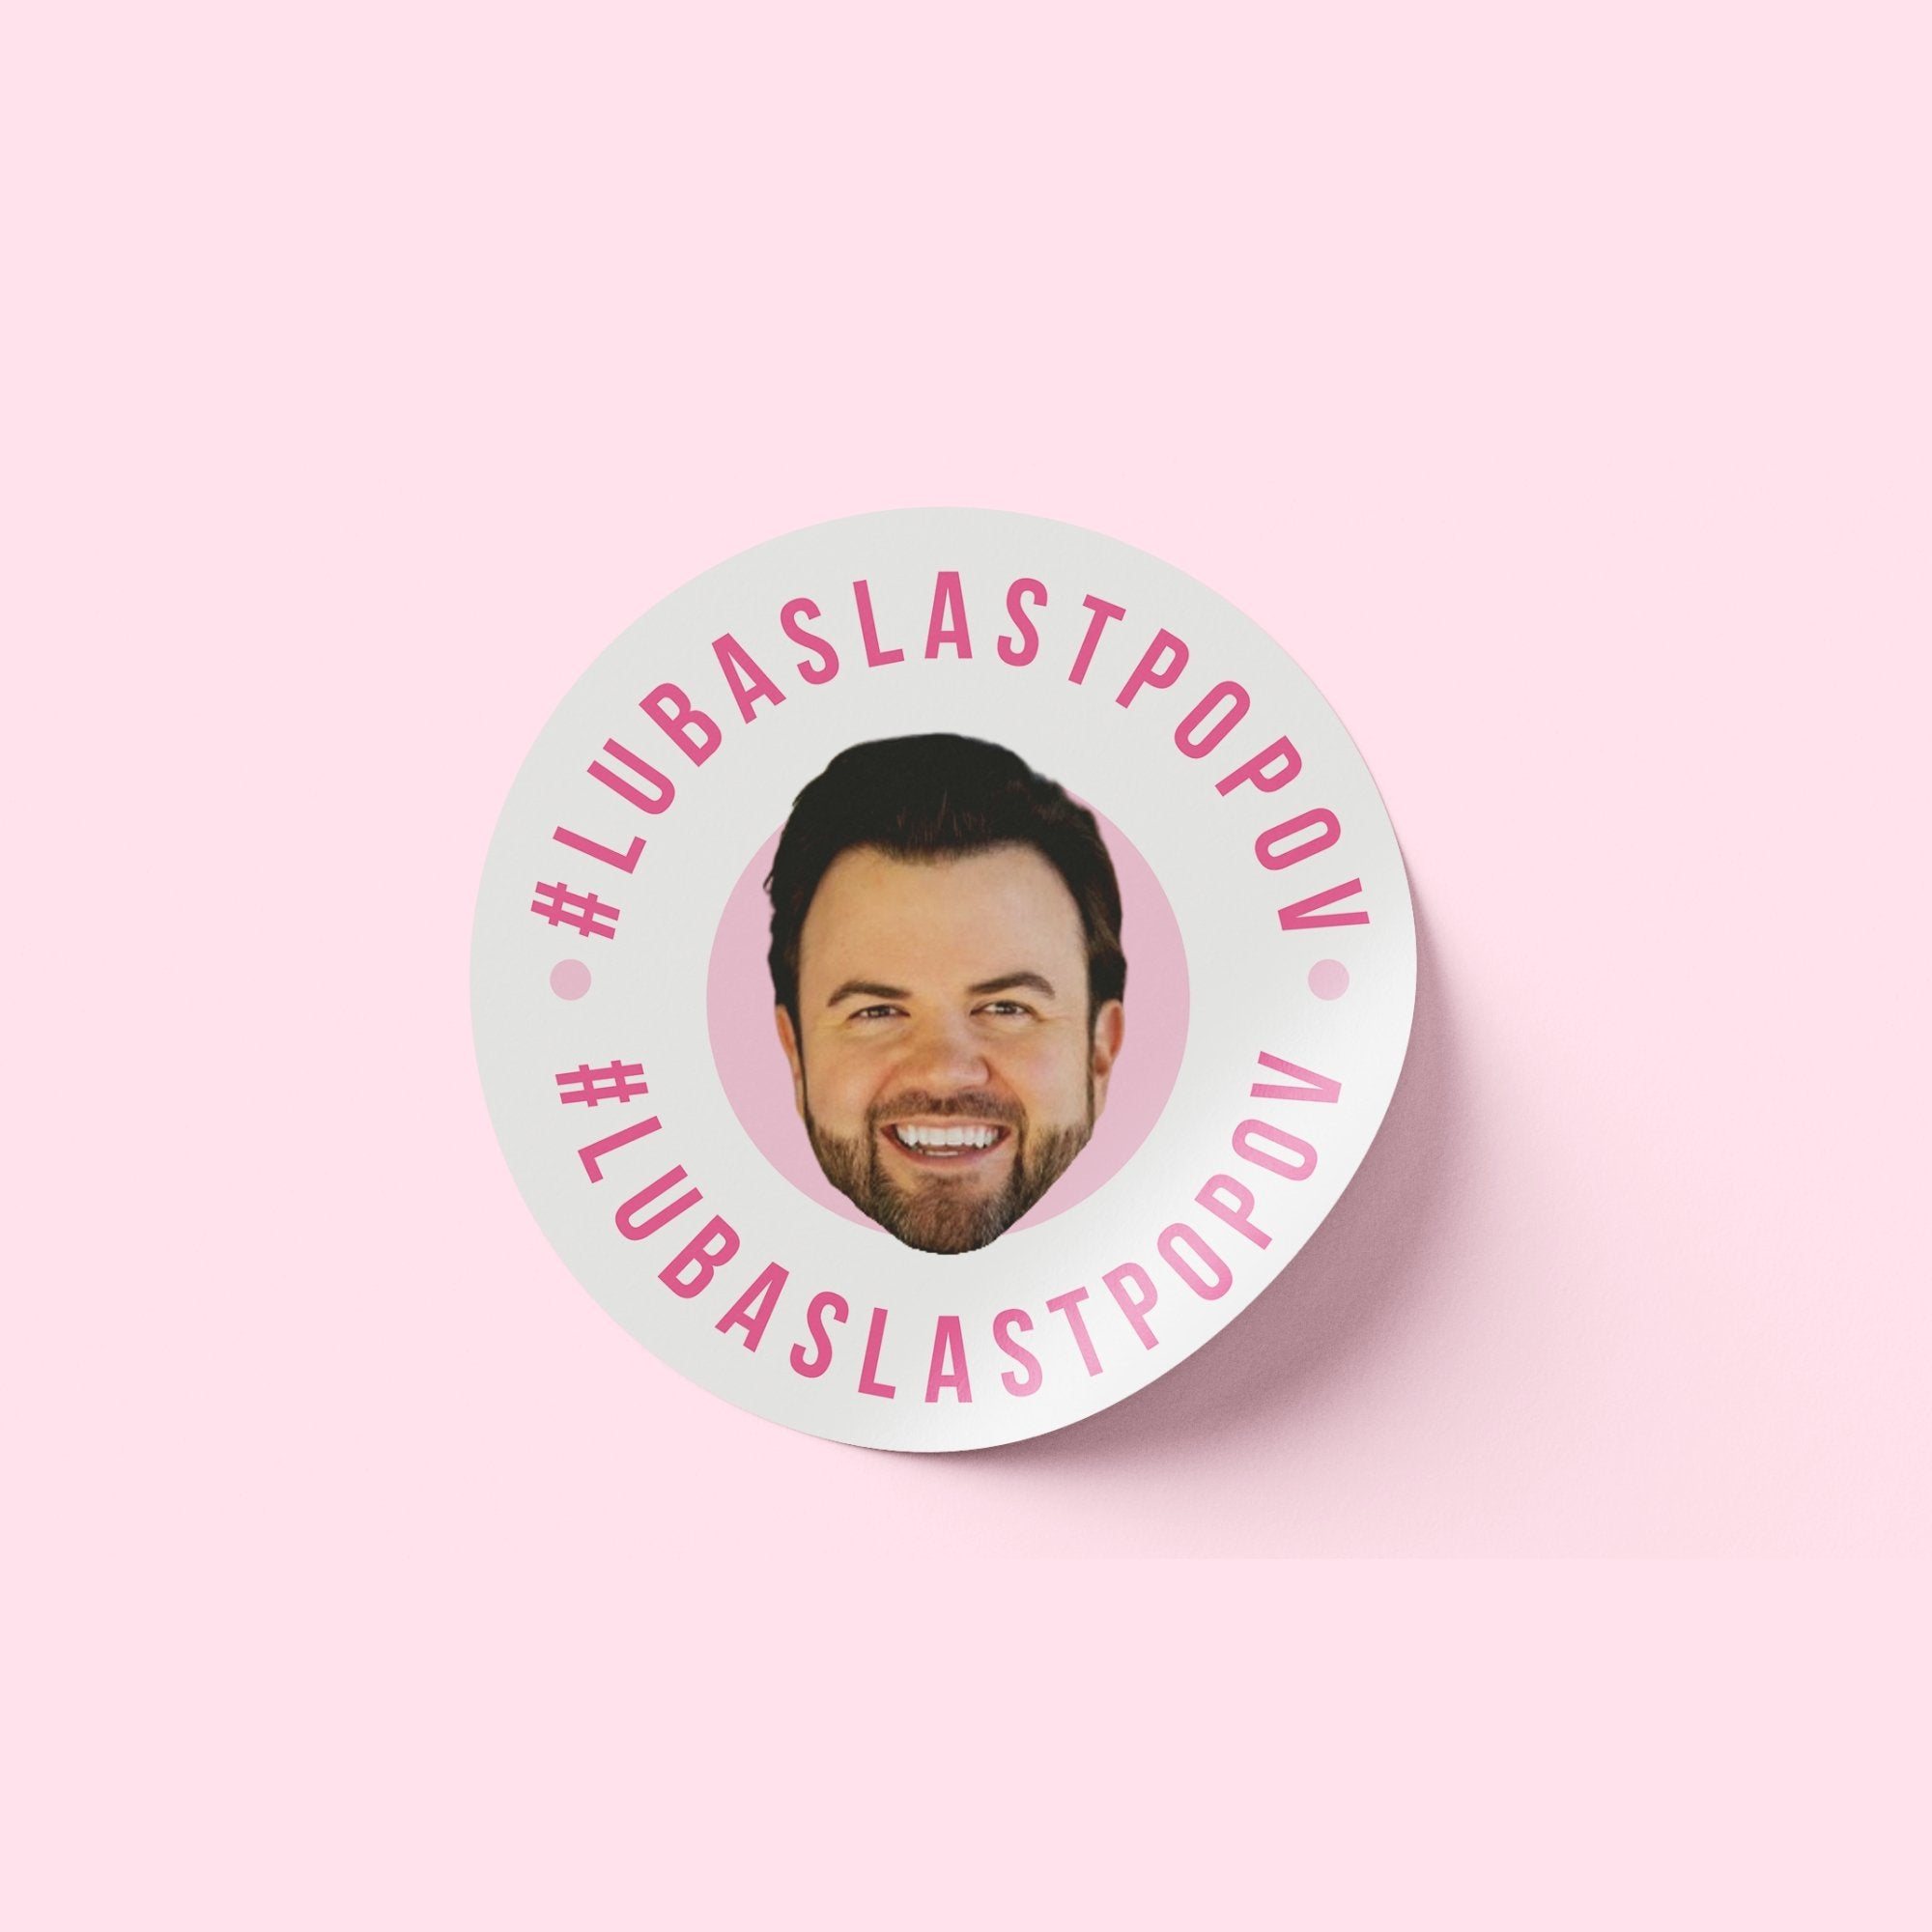 Custom Face Stickers (Set of 12) - Sprinkled With Pink #bachelorette #custom #gifts